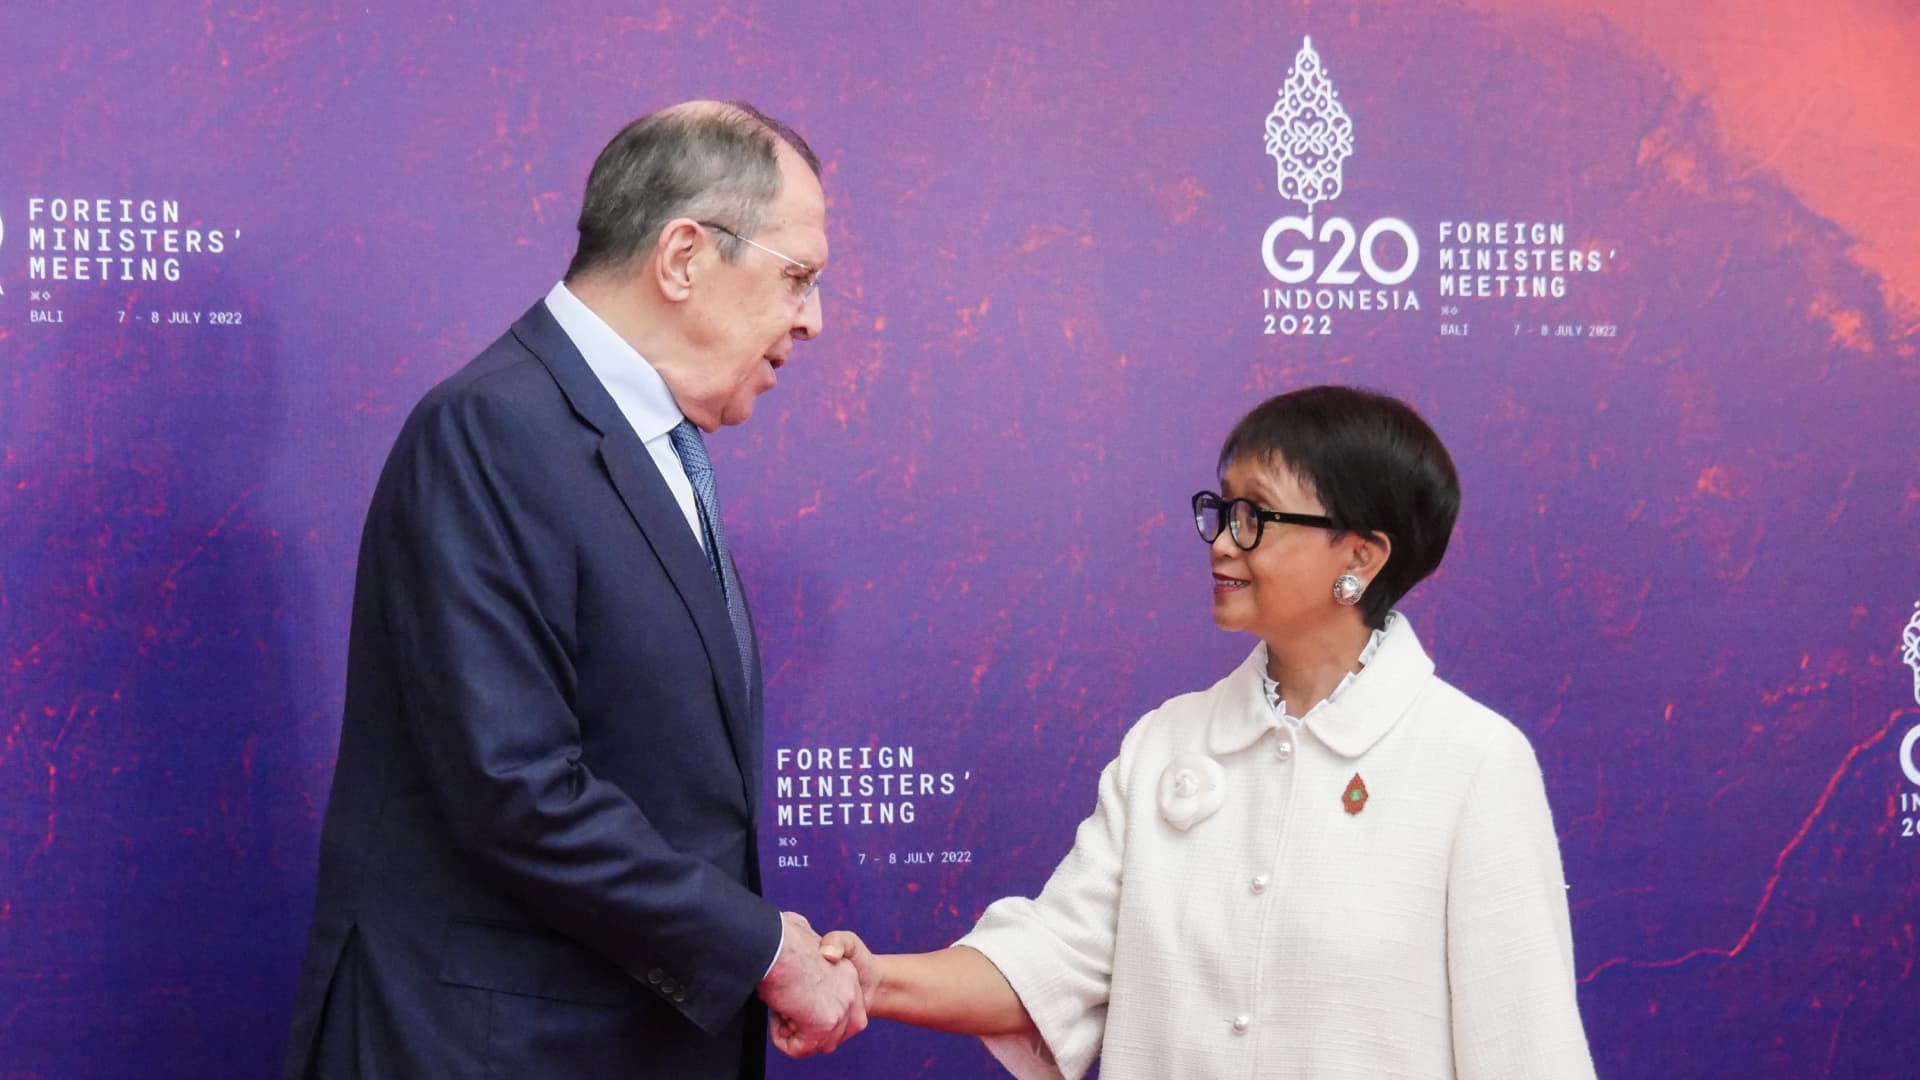 Russia's Lavrov meets Indonesian Foreign Minister Retno Marsudi at the G-20 ministers' meeting in Bali, Indonesia on July 8, 2022.